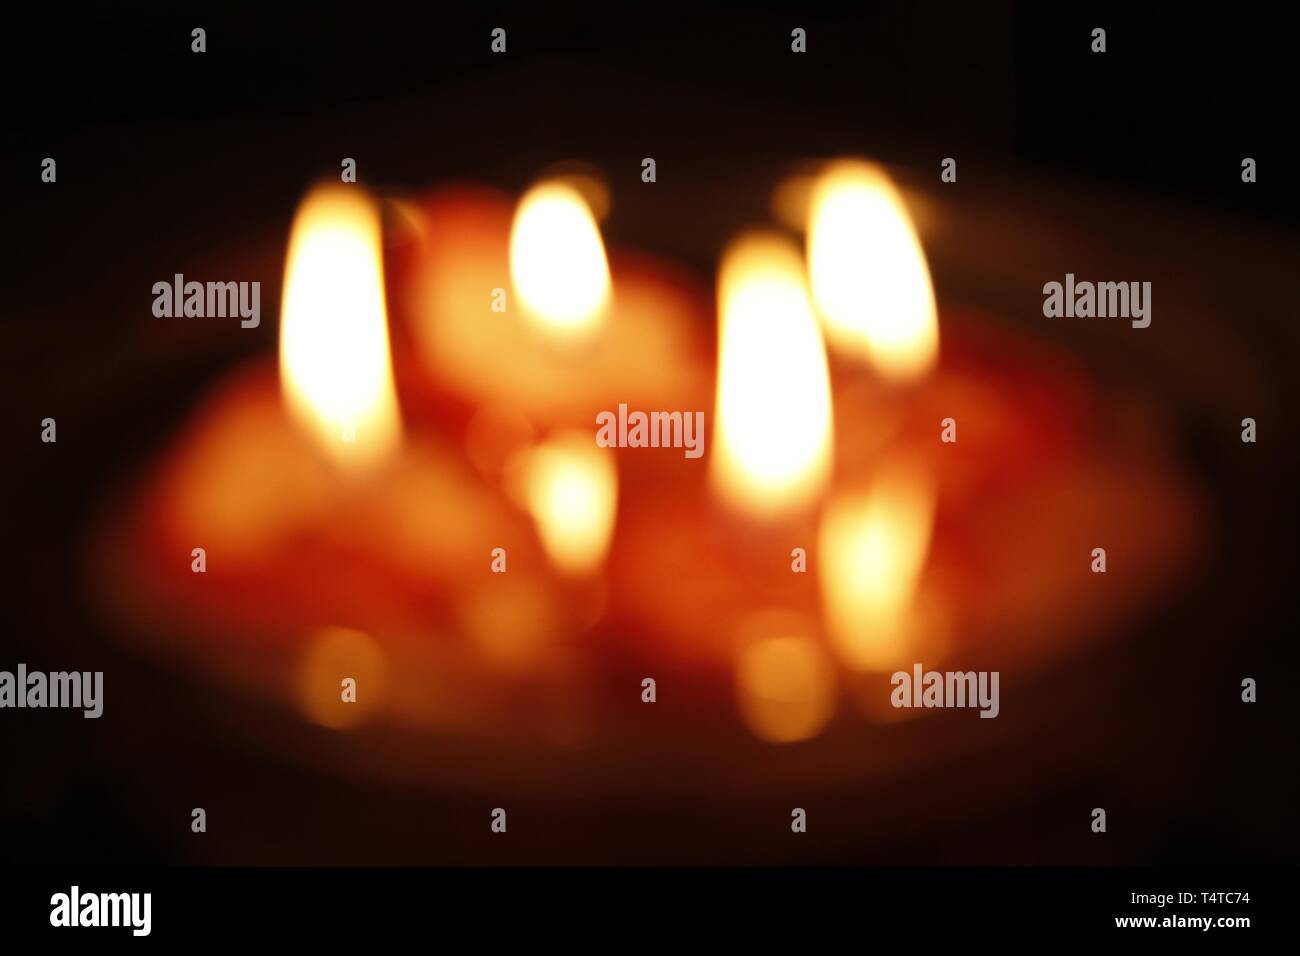 Burning candles in a bowl, blurred Stock Photo